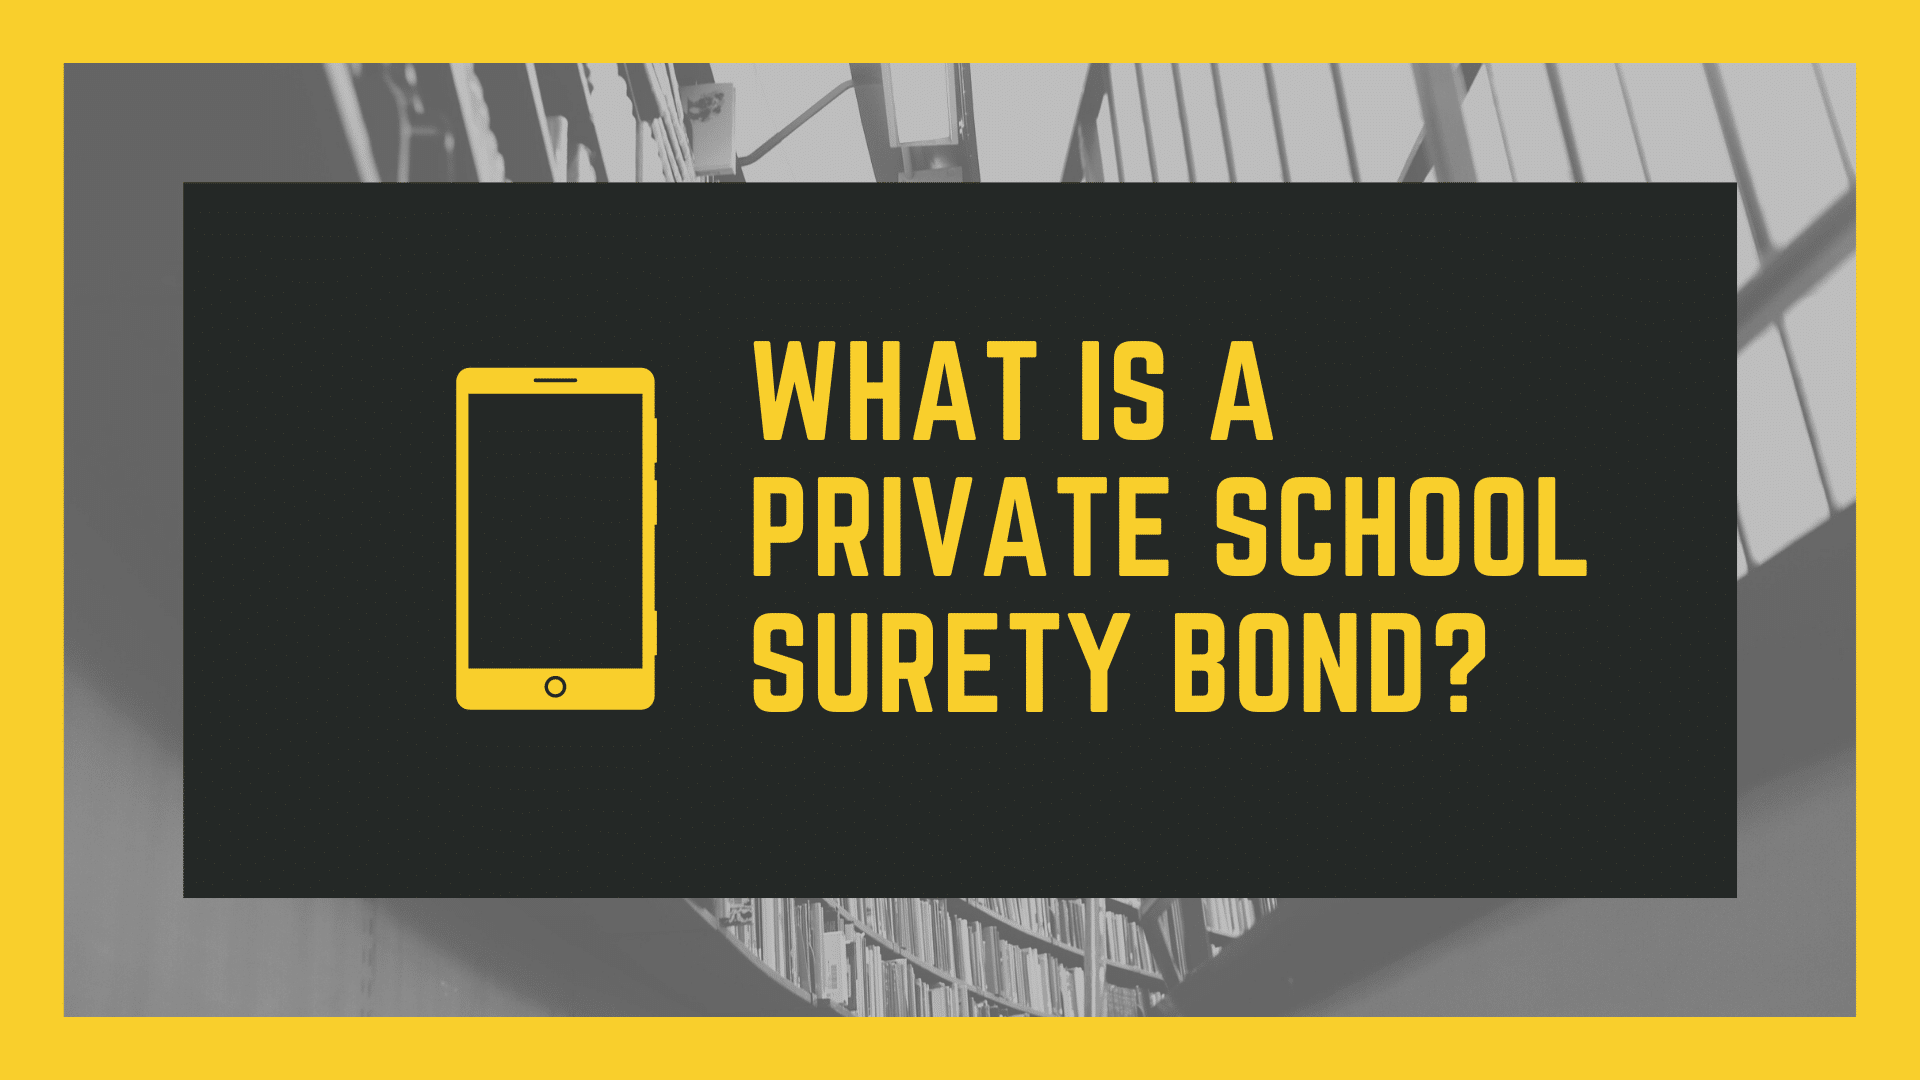 surety bond - What Is a School Bond (Private School Bond) - buildings with back text box 